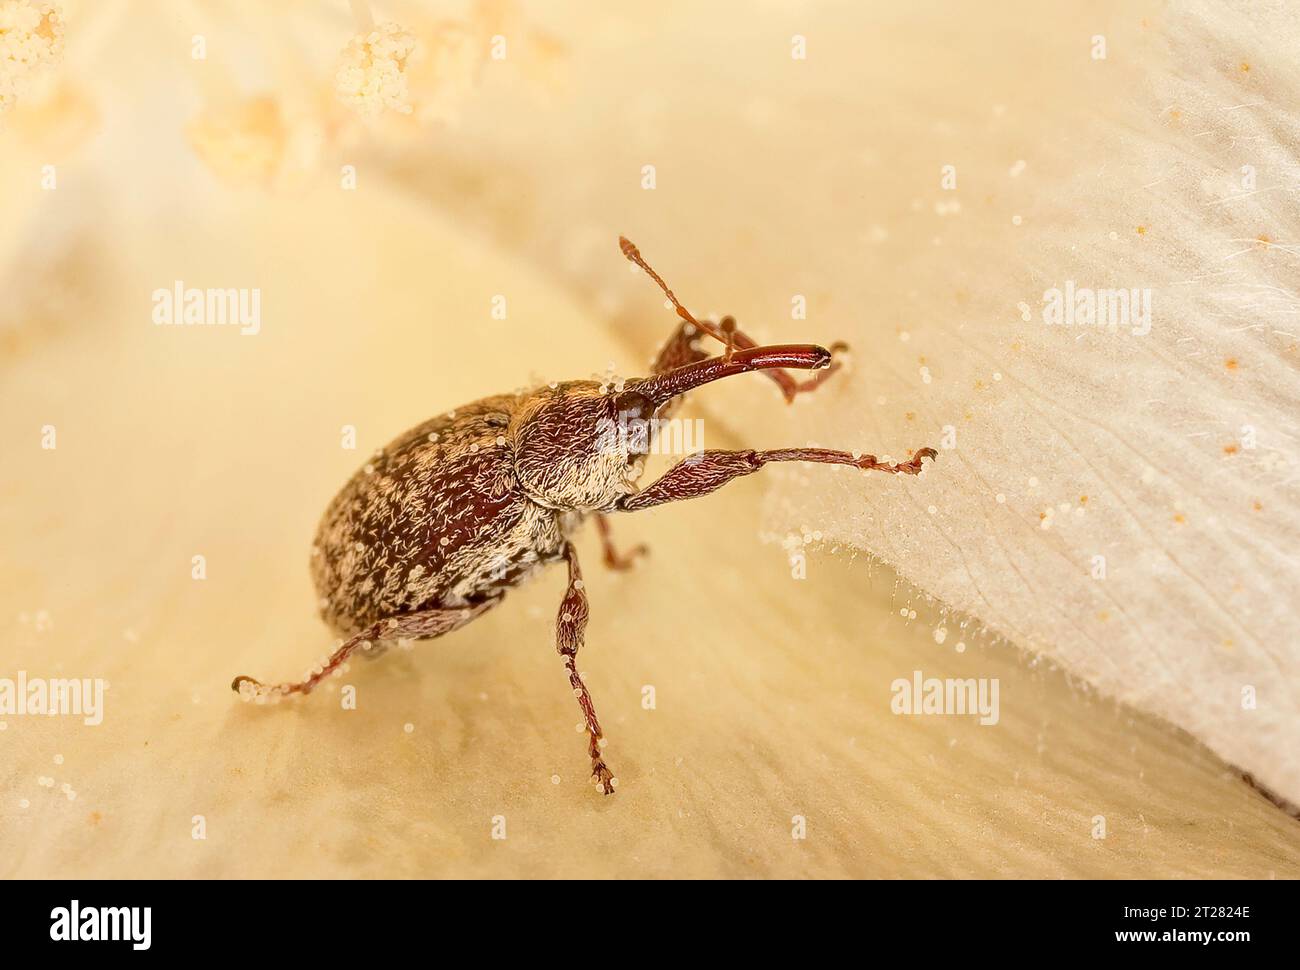 A boll weevil.  Boll weevils have cost the cotton industry $23 billion in economic losses since it moved into the United States from Mexico in the 1890’s. Stock Photo